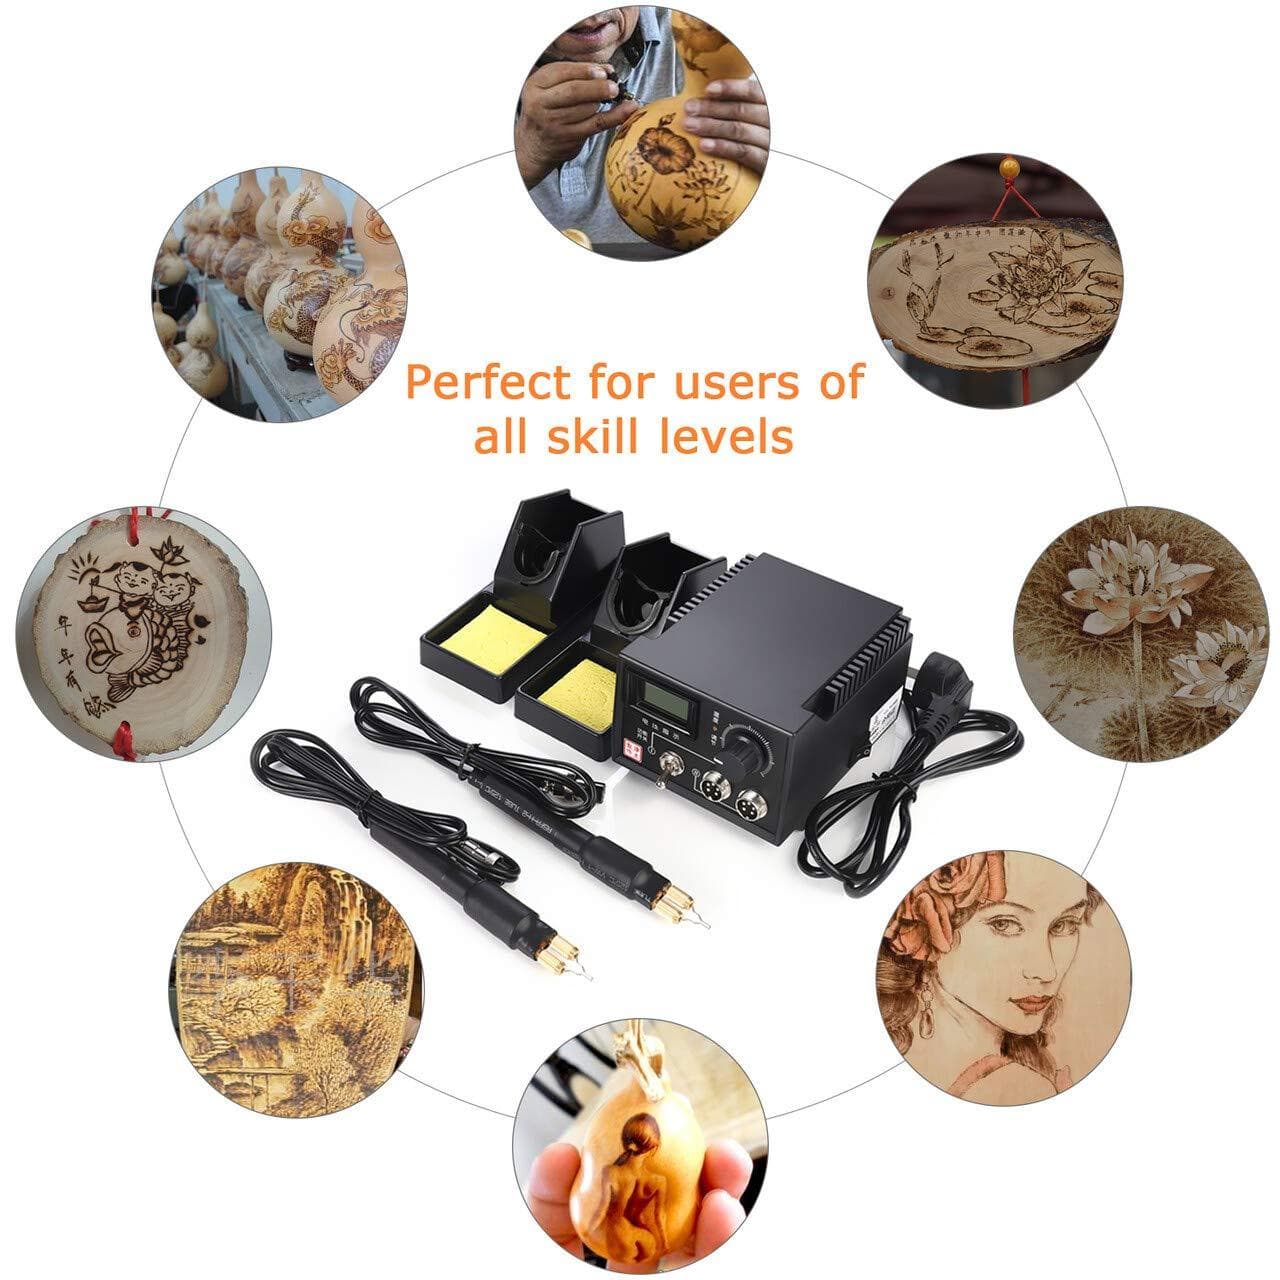 Viiart Professional Pyrography Tool Kit 60W Upgraded Wood Burning Kits with  20pcs Pyrography Wire Tips Digital Adjustable Pyrography Machine for Wood